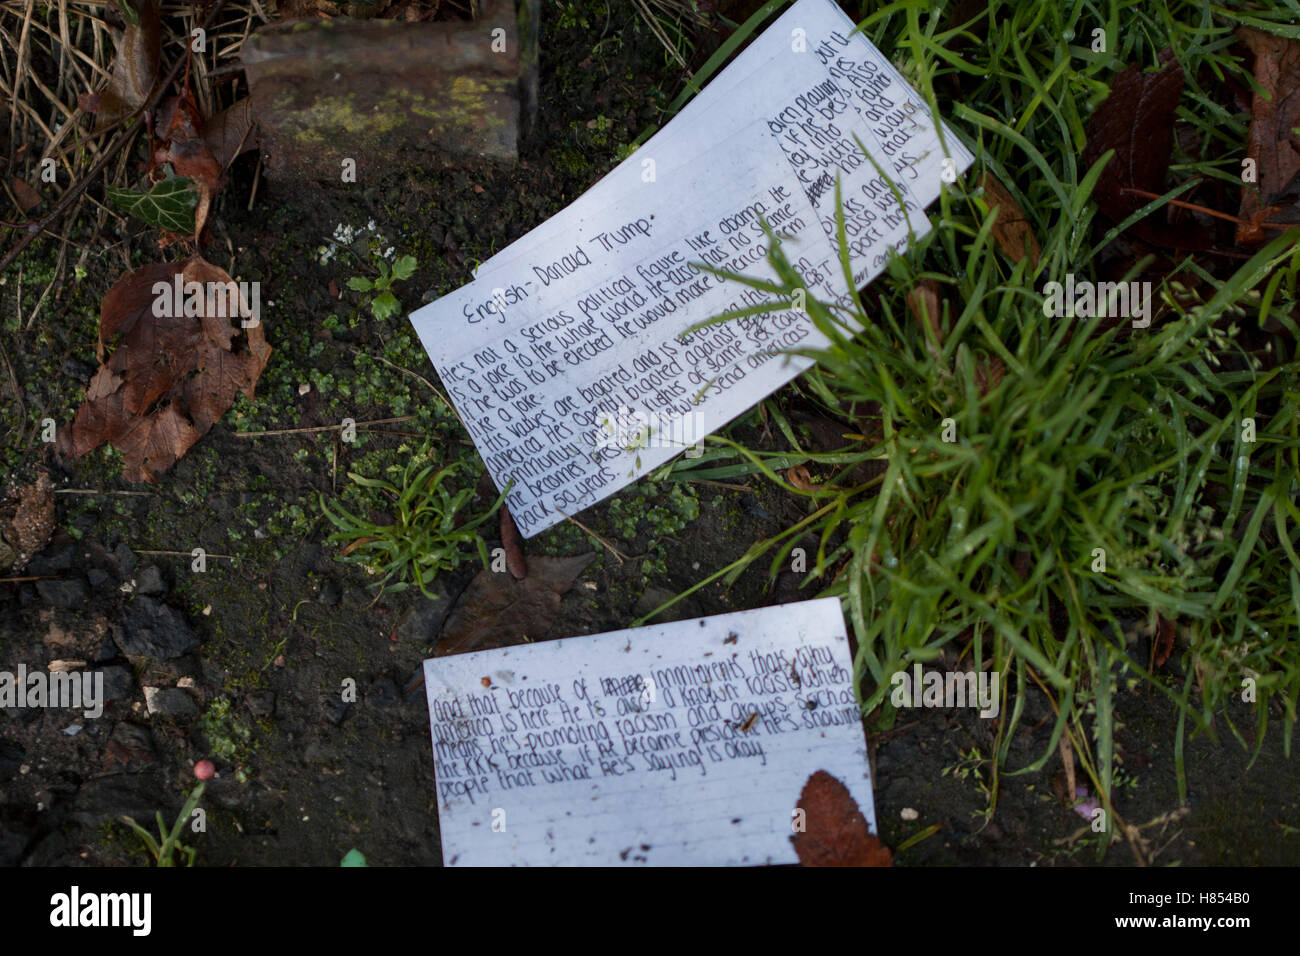 Shaws Rd, Belfast  UK. 10th November   2016. A day after the Election Victory  of President Elect Donald J Trump, A student's discarded English homework Cue Cards are found on a street in Belfast. The cards describes Mr Trump values as Bigoted and not a serious political figure like Barack Obama Stock Photo